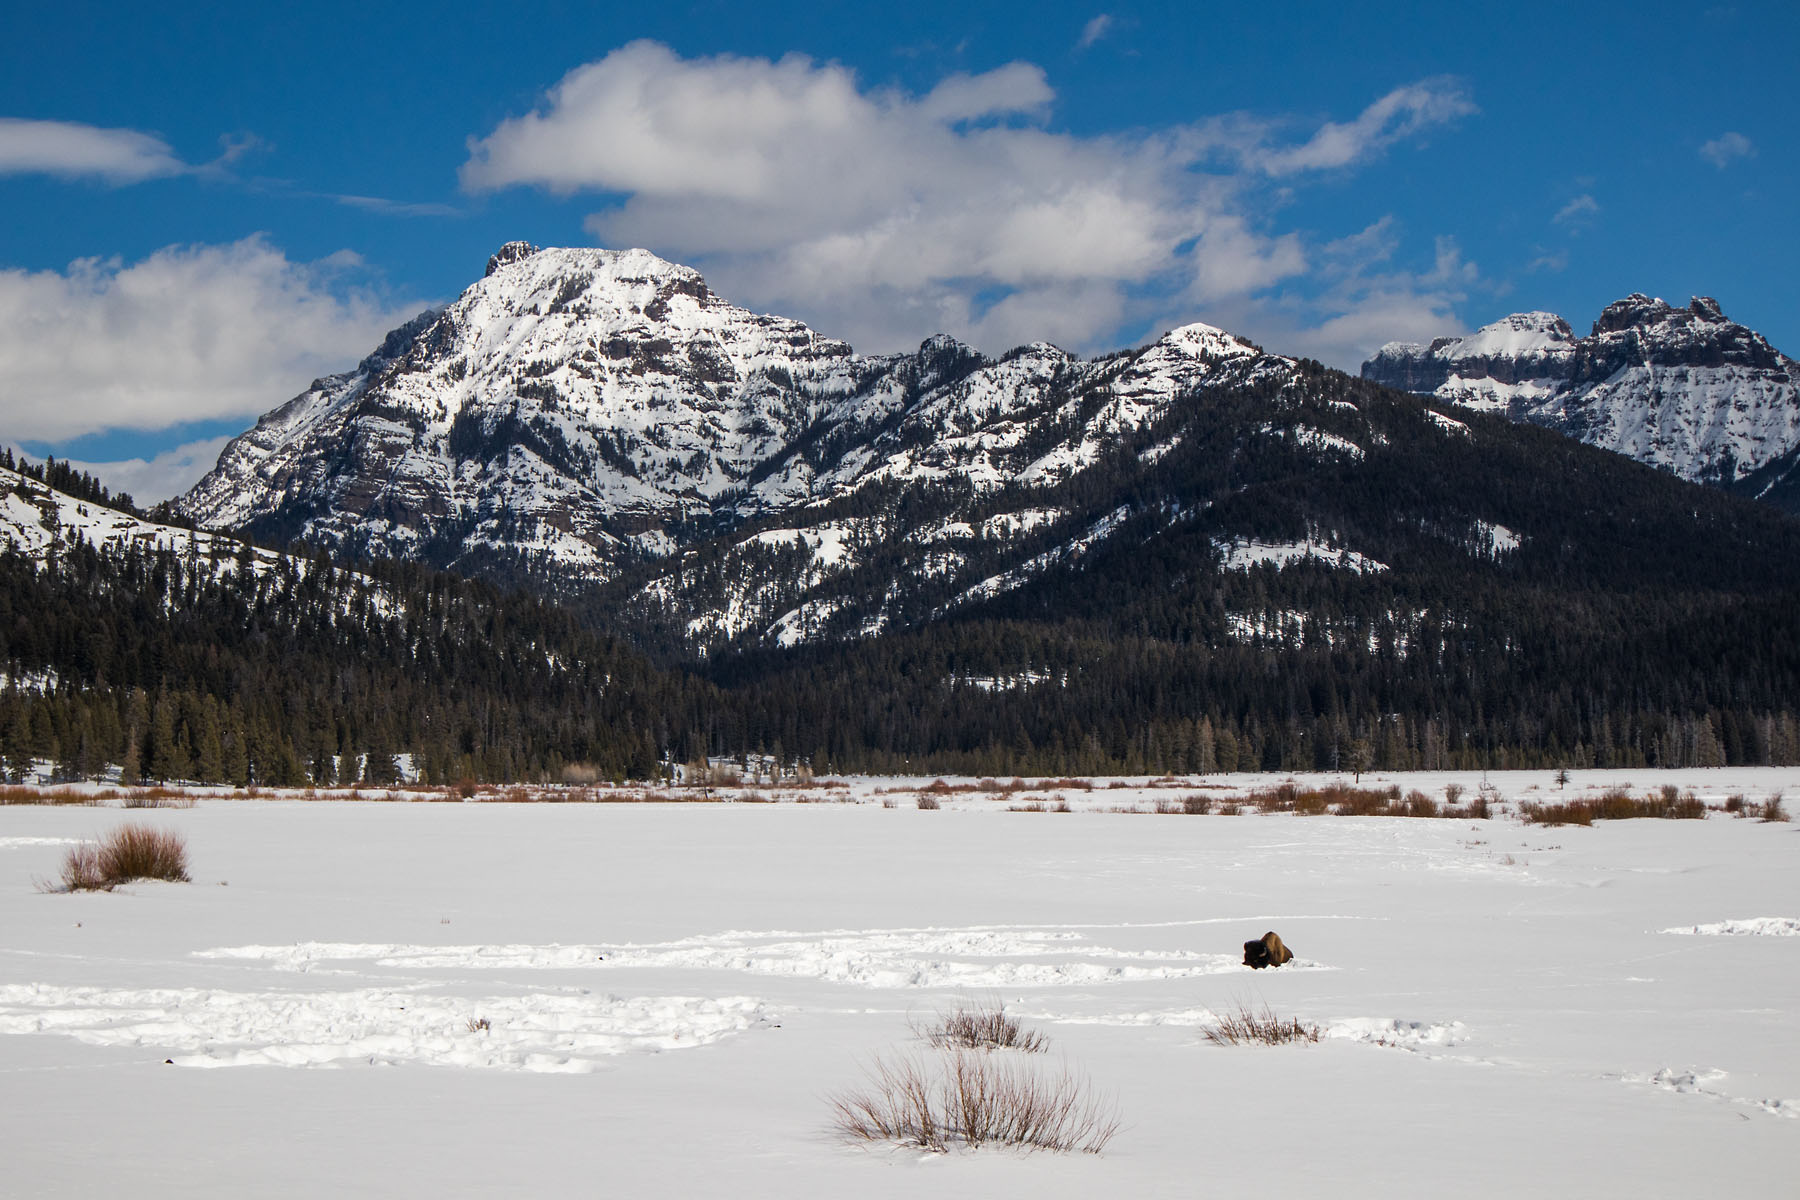 Bison taking a snow nap, Lamar Valley, Yellowstone, March 2021.  Click for next photo.